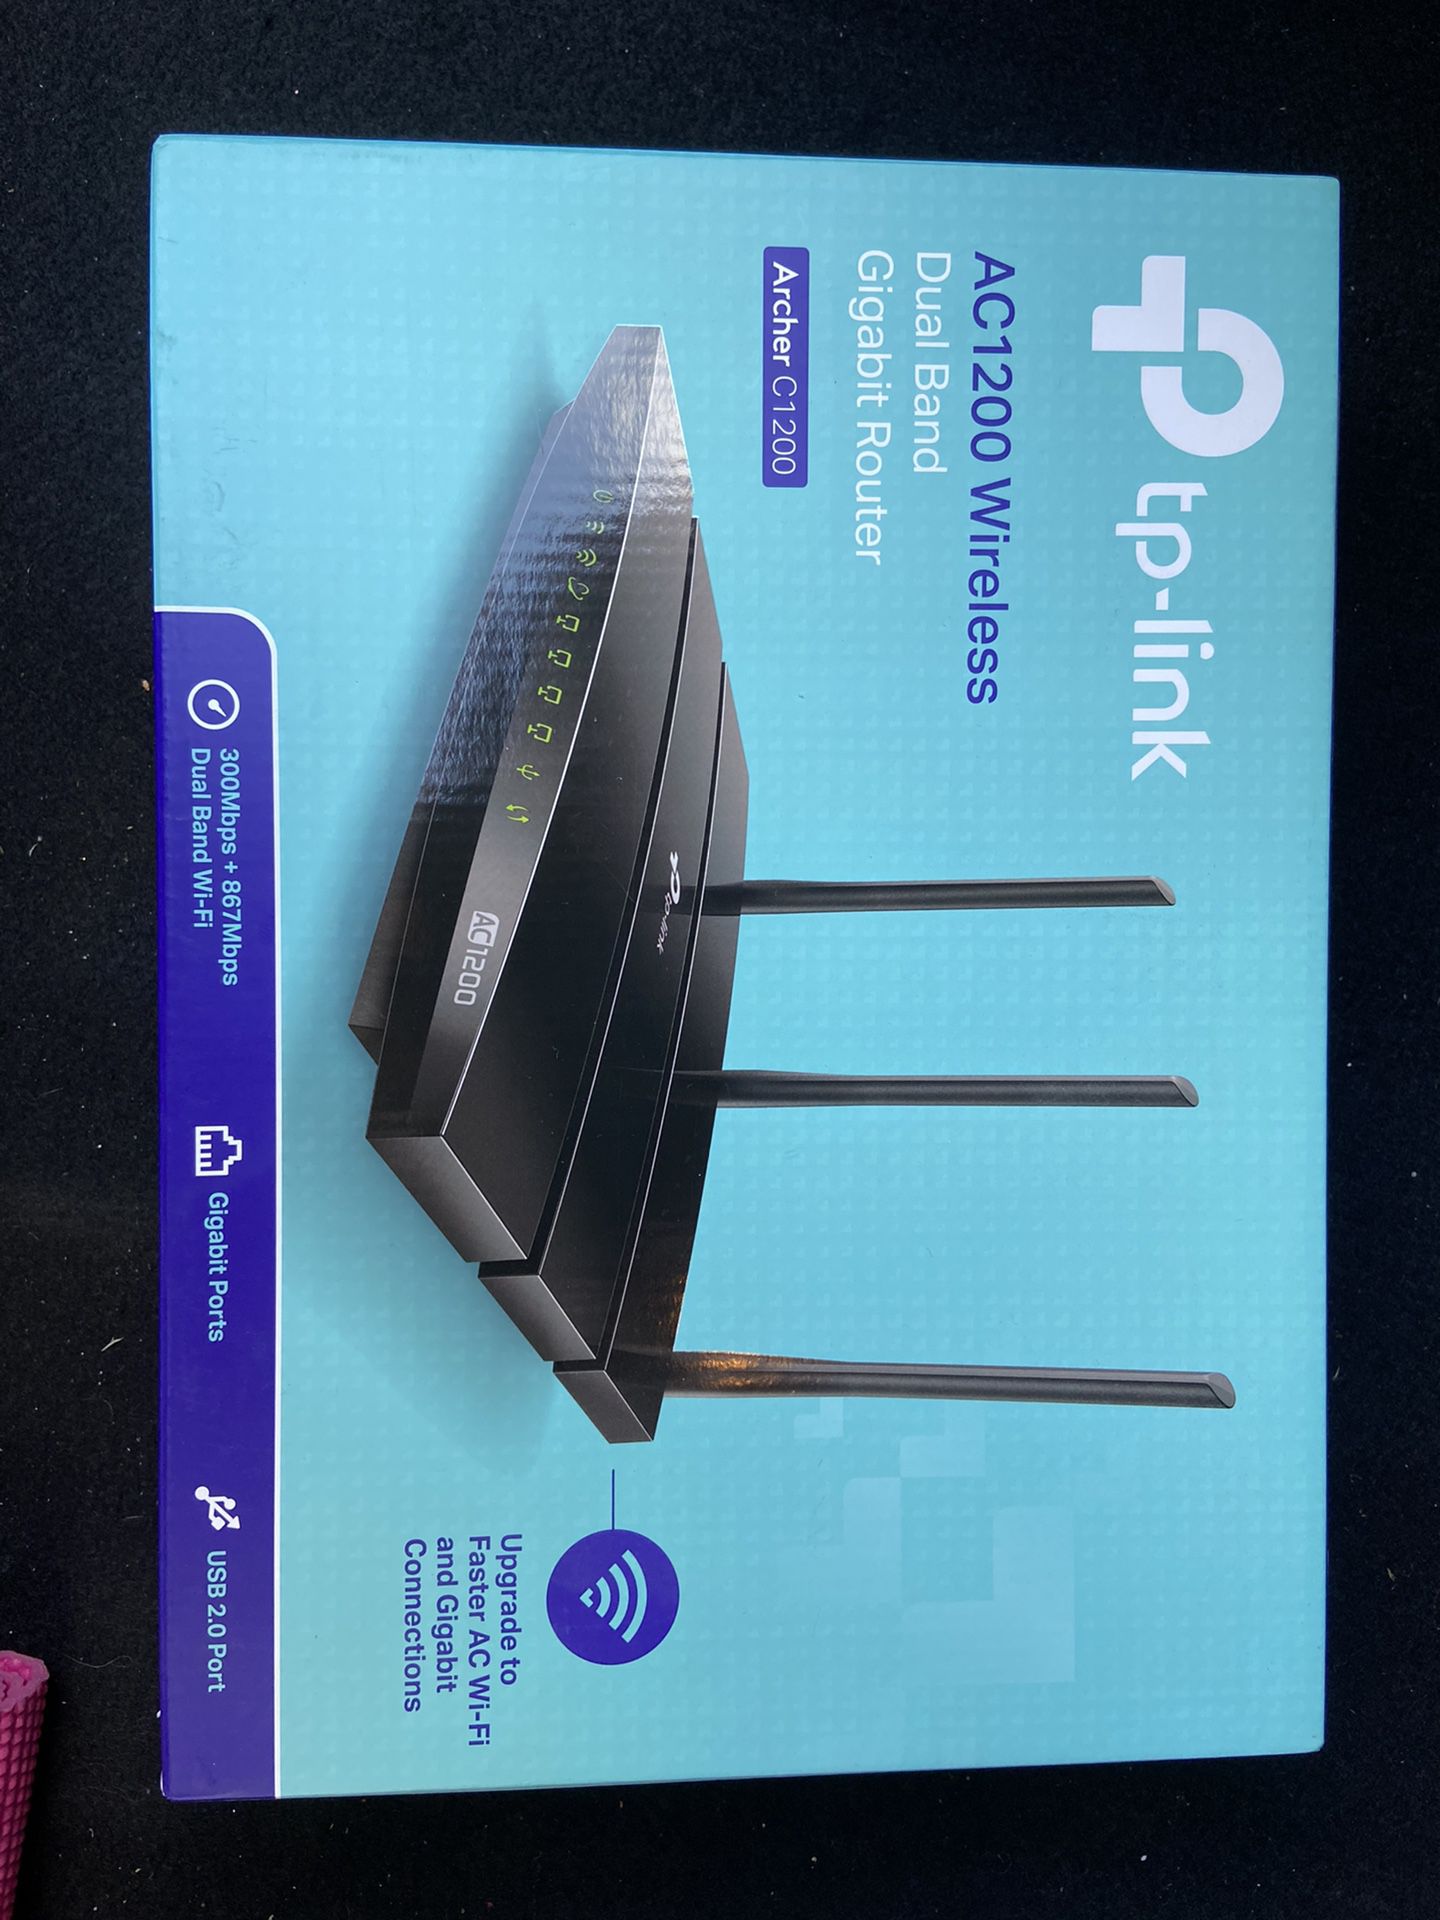 TP Link WiFi Router